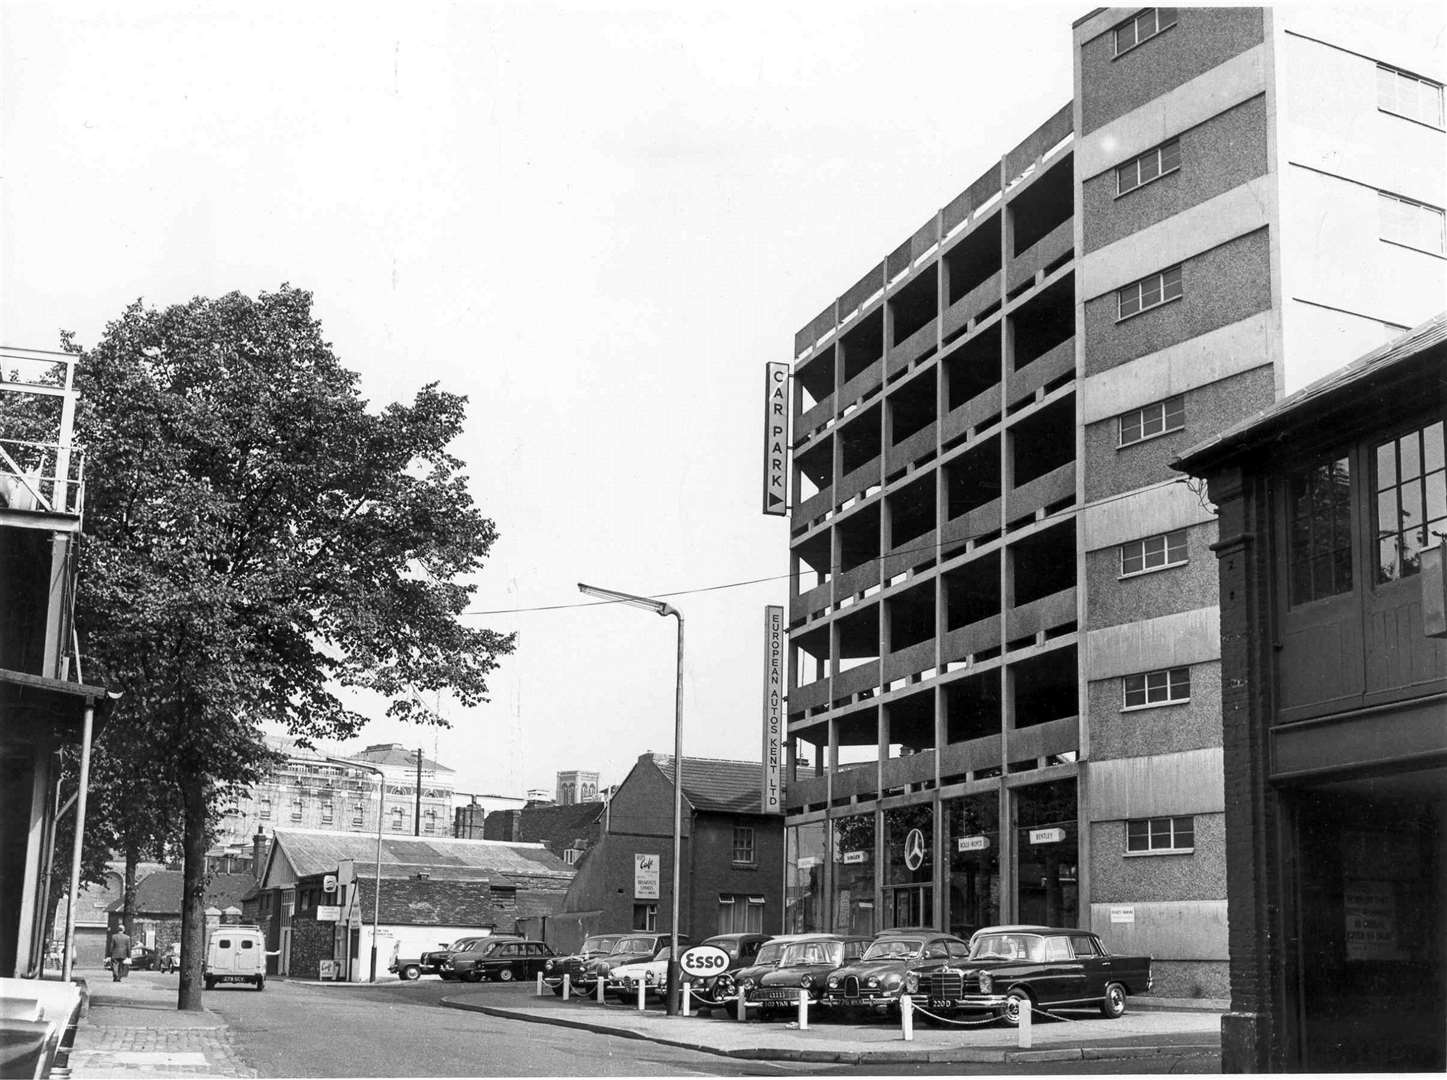 Maidstone's first multi-storey car park opened in Medway Street in 1962